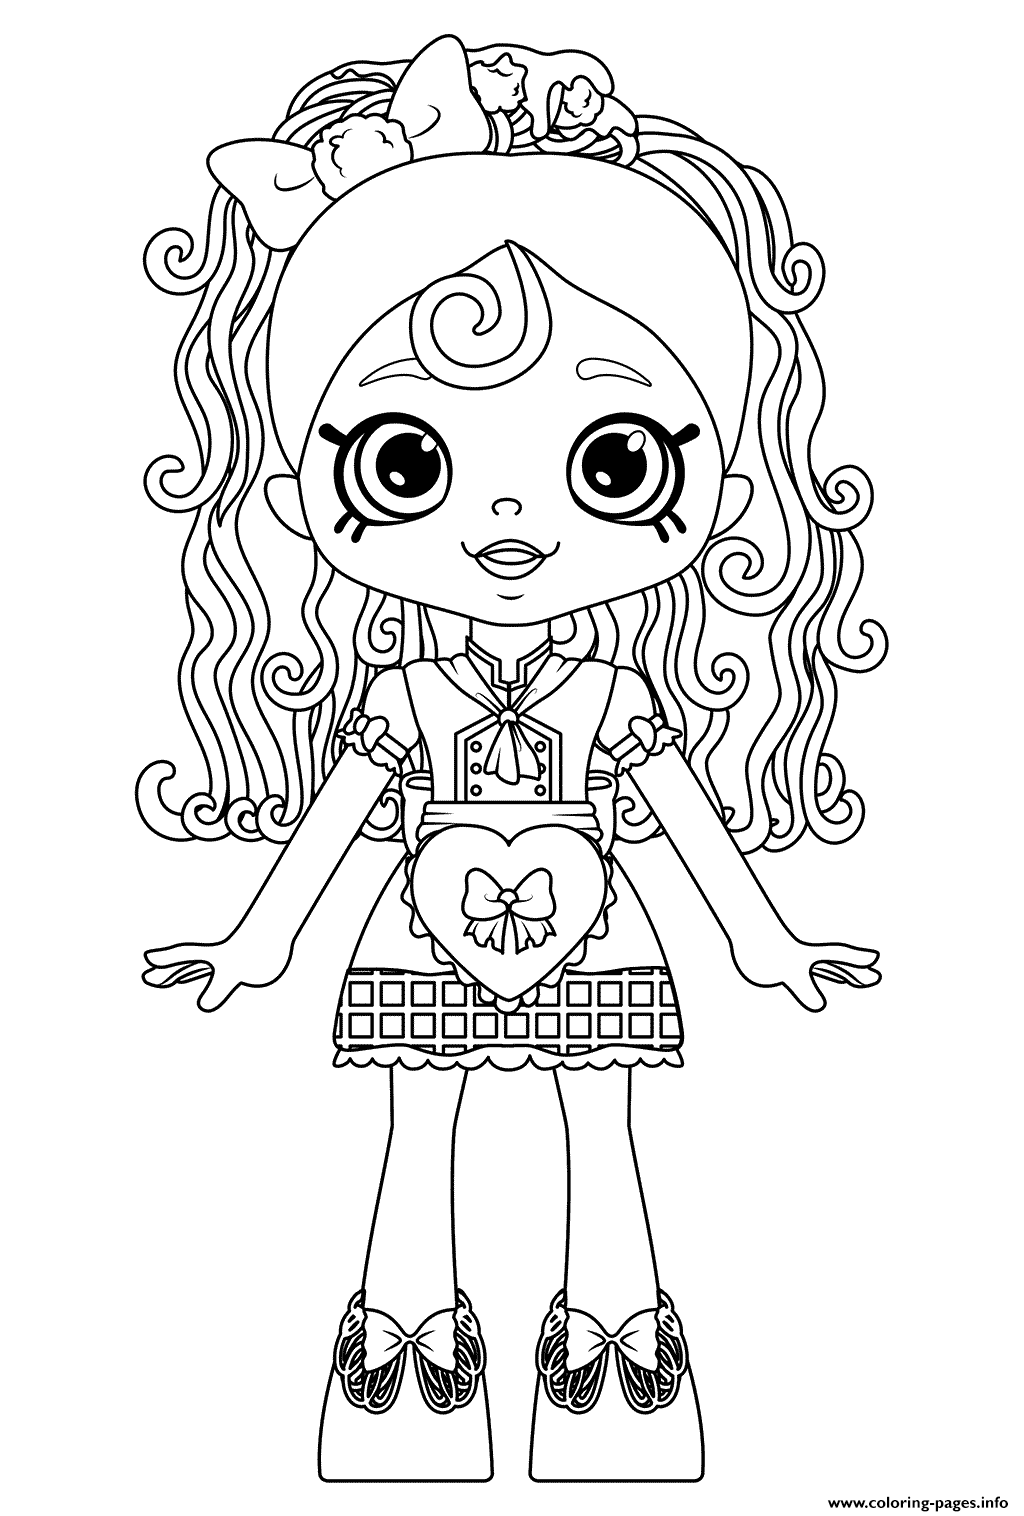 Shopkins Doll Spaghetti Sue Lil Shoppie From The Happy Places coloring